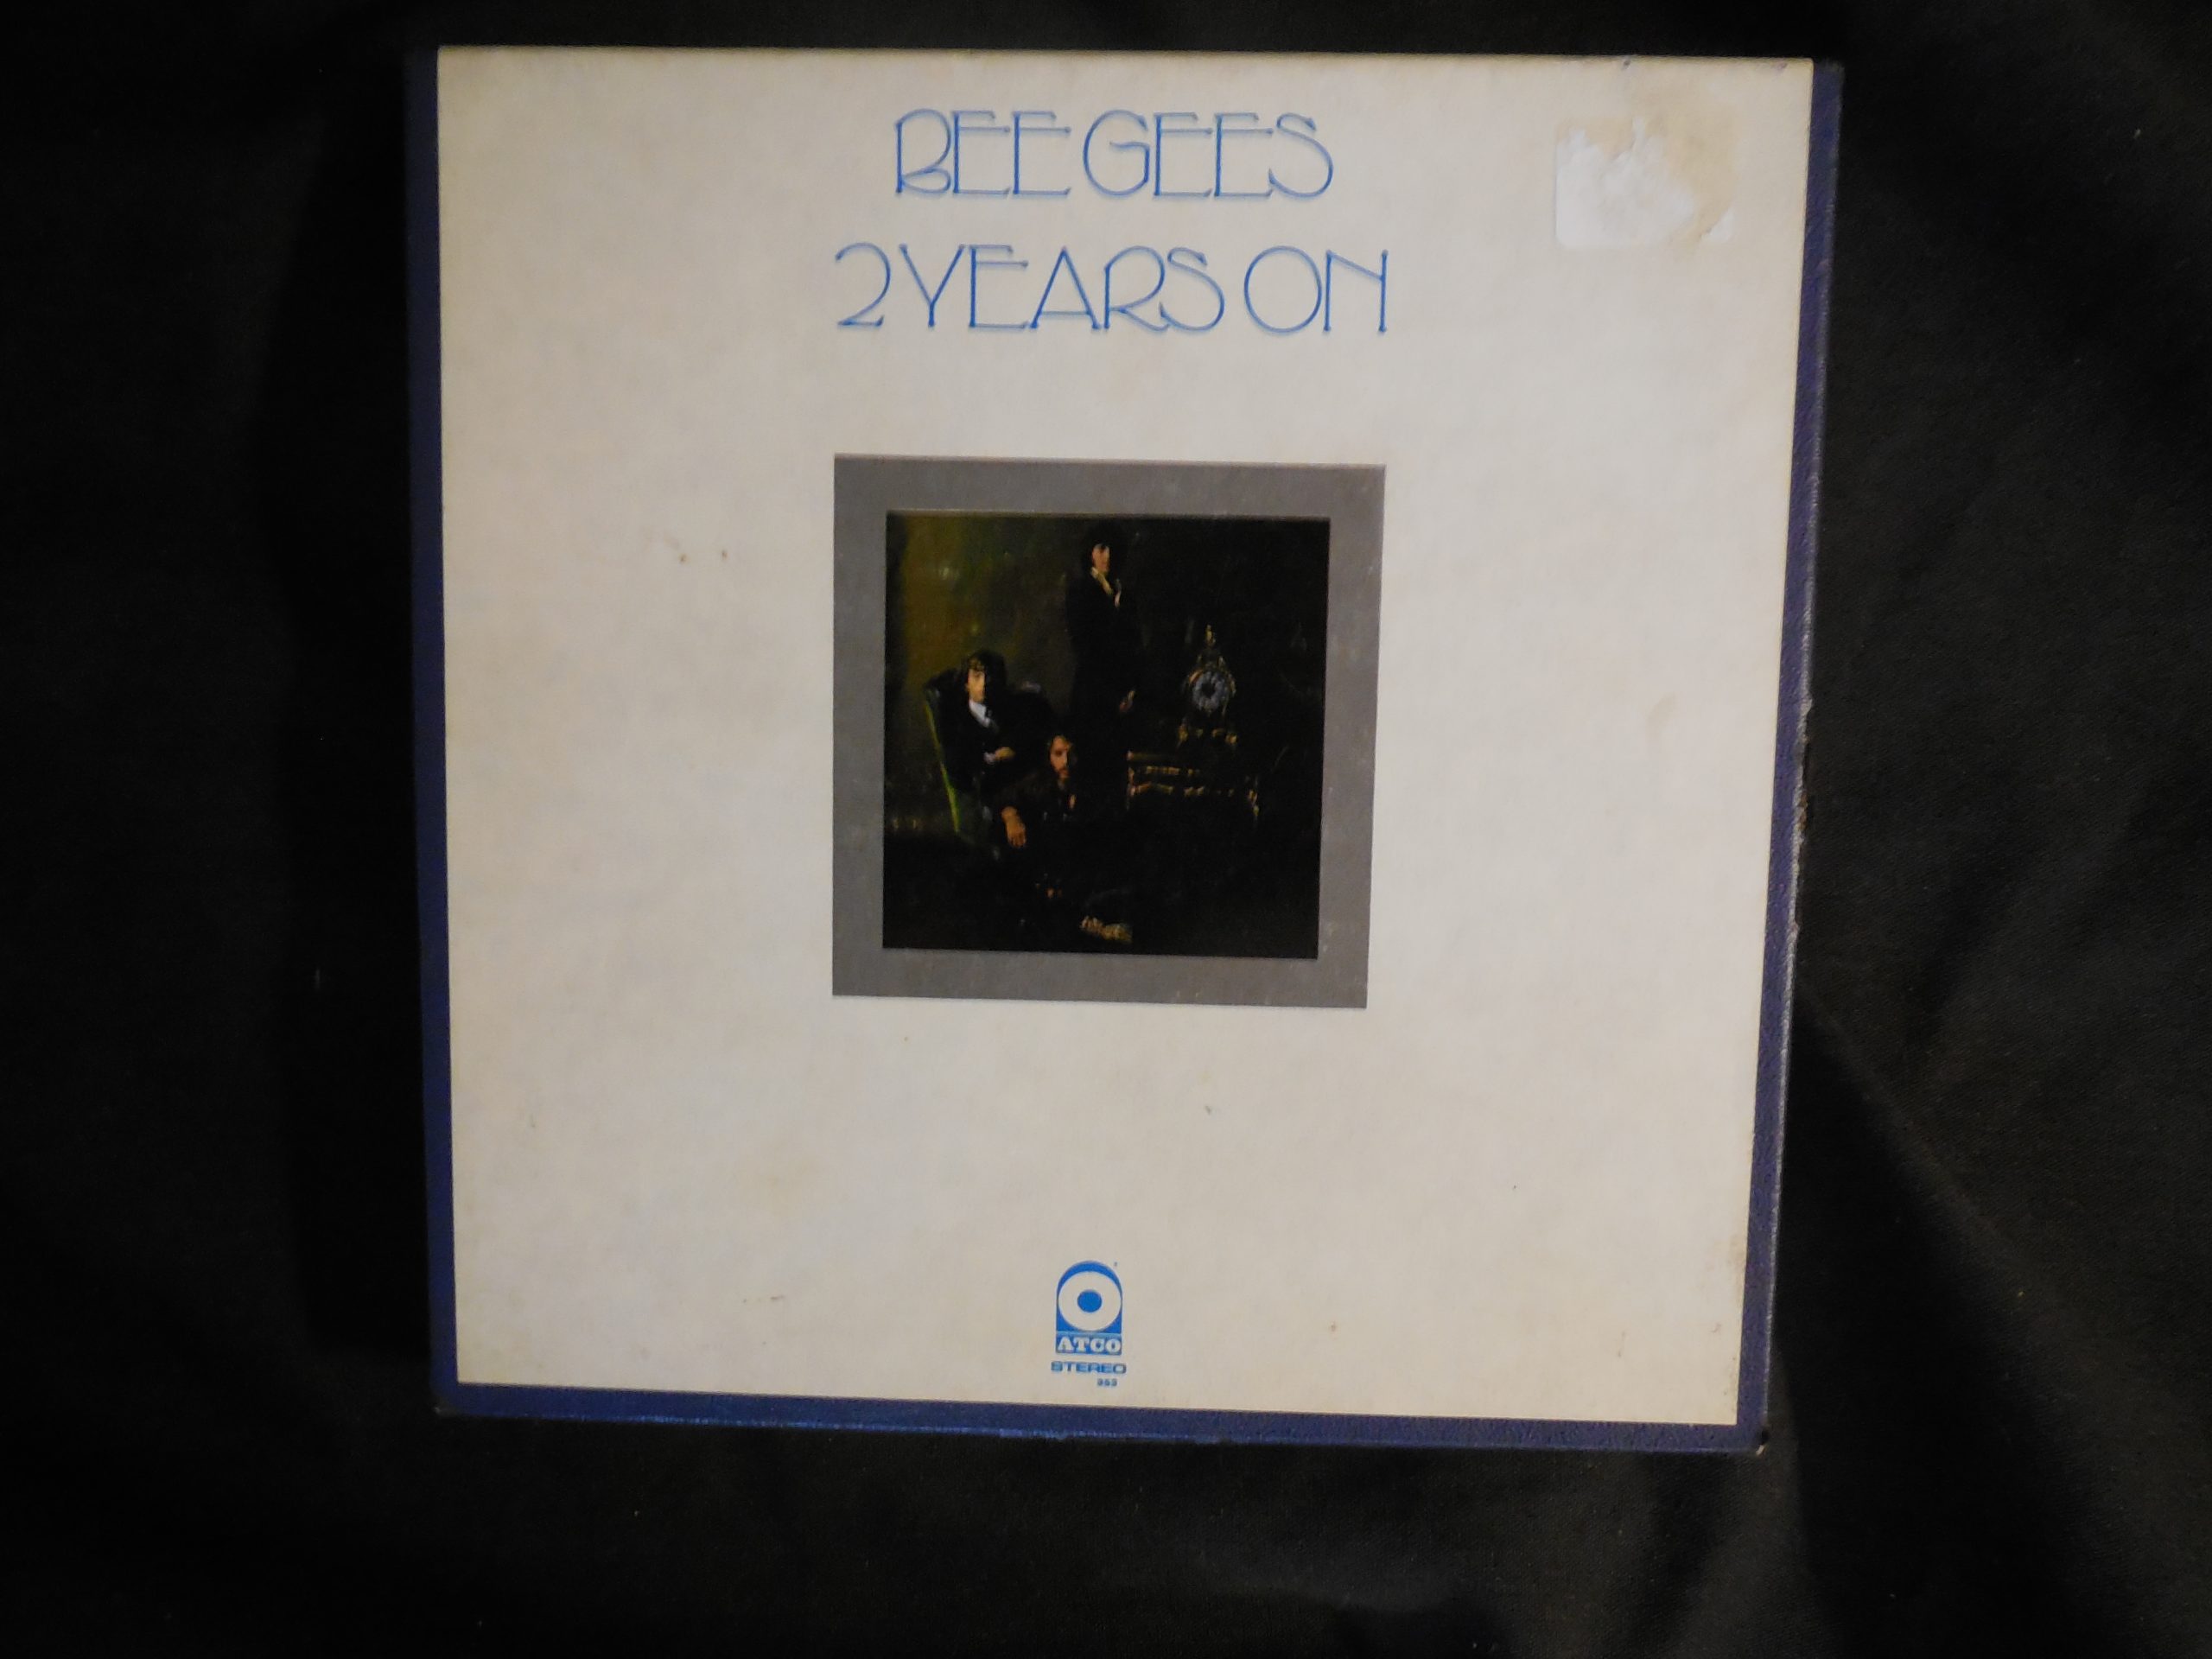 Bee Gees-2 Years On-Reel To Reel Tape – Very English and Rolling Stone